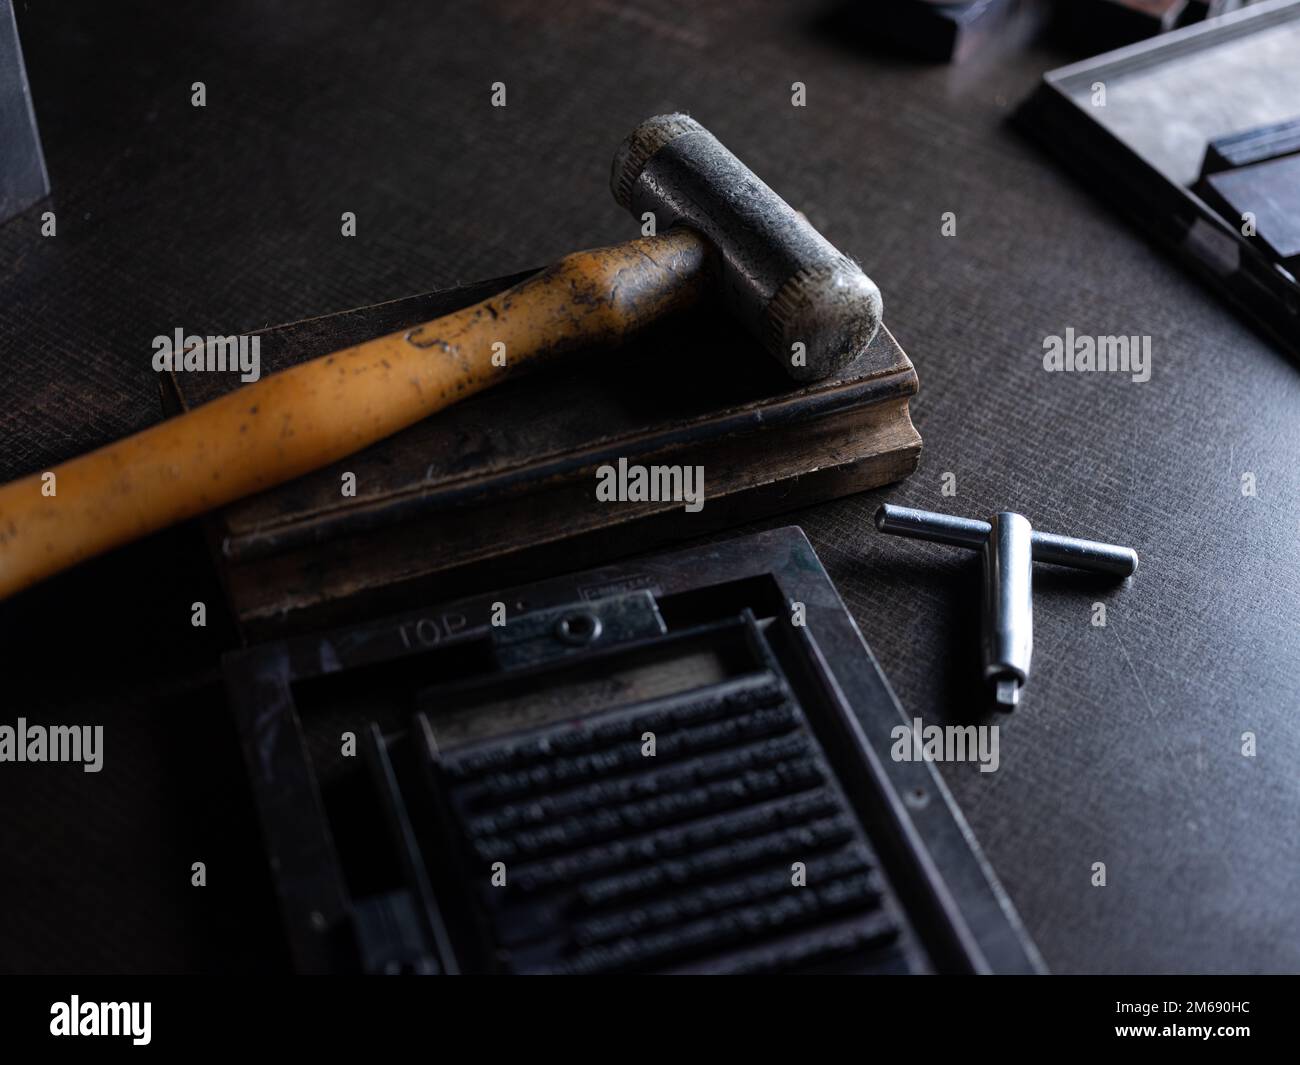 Letterpress printing tools and equipment. Stock Photo